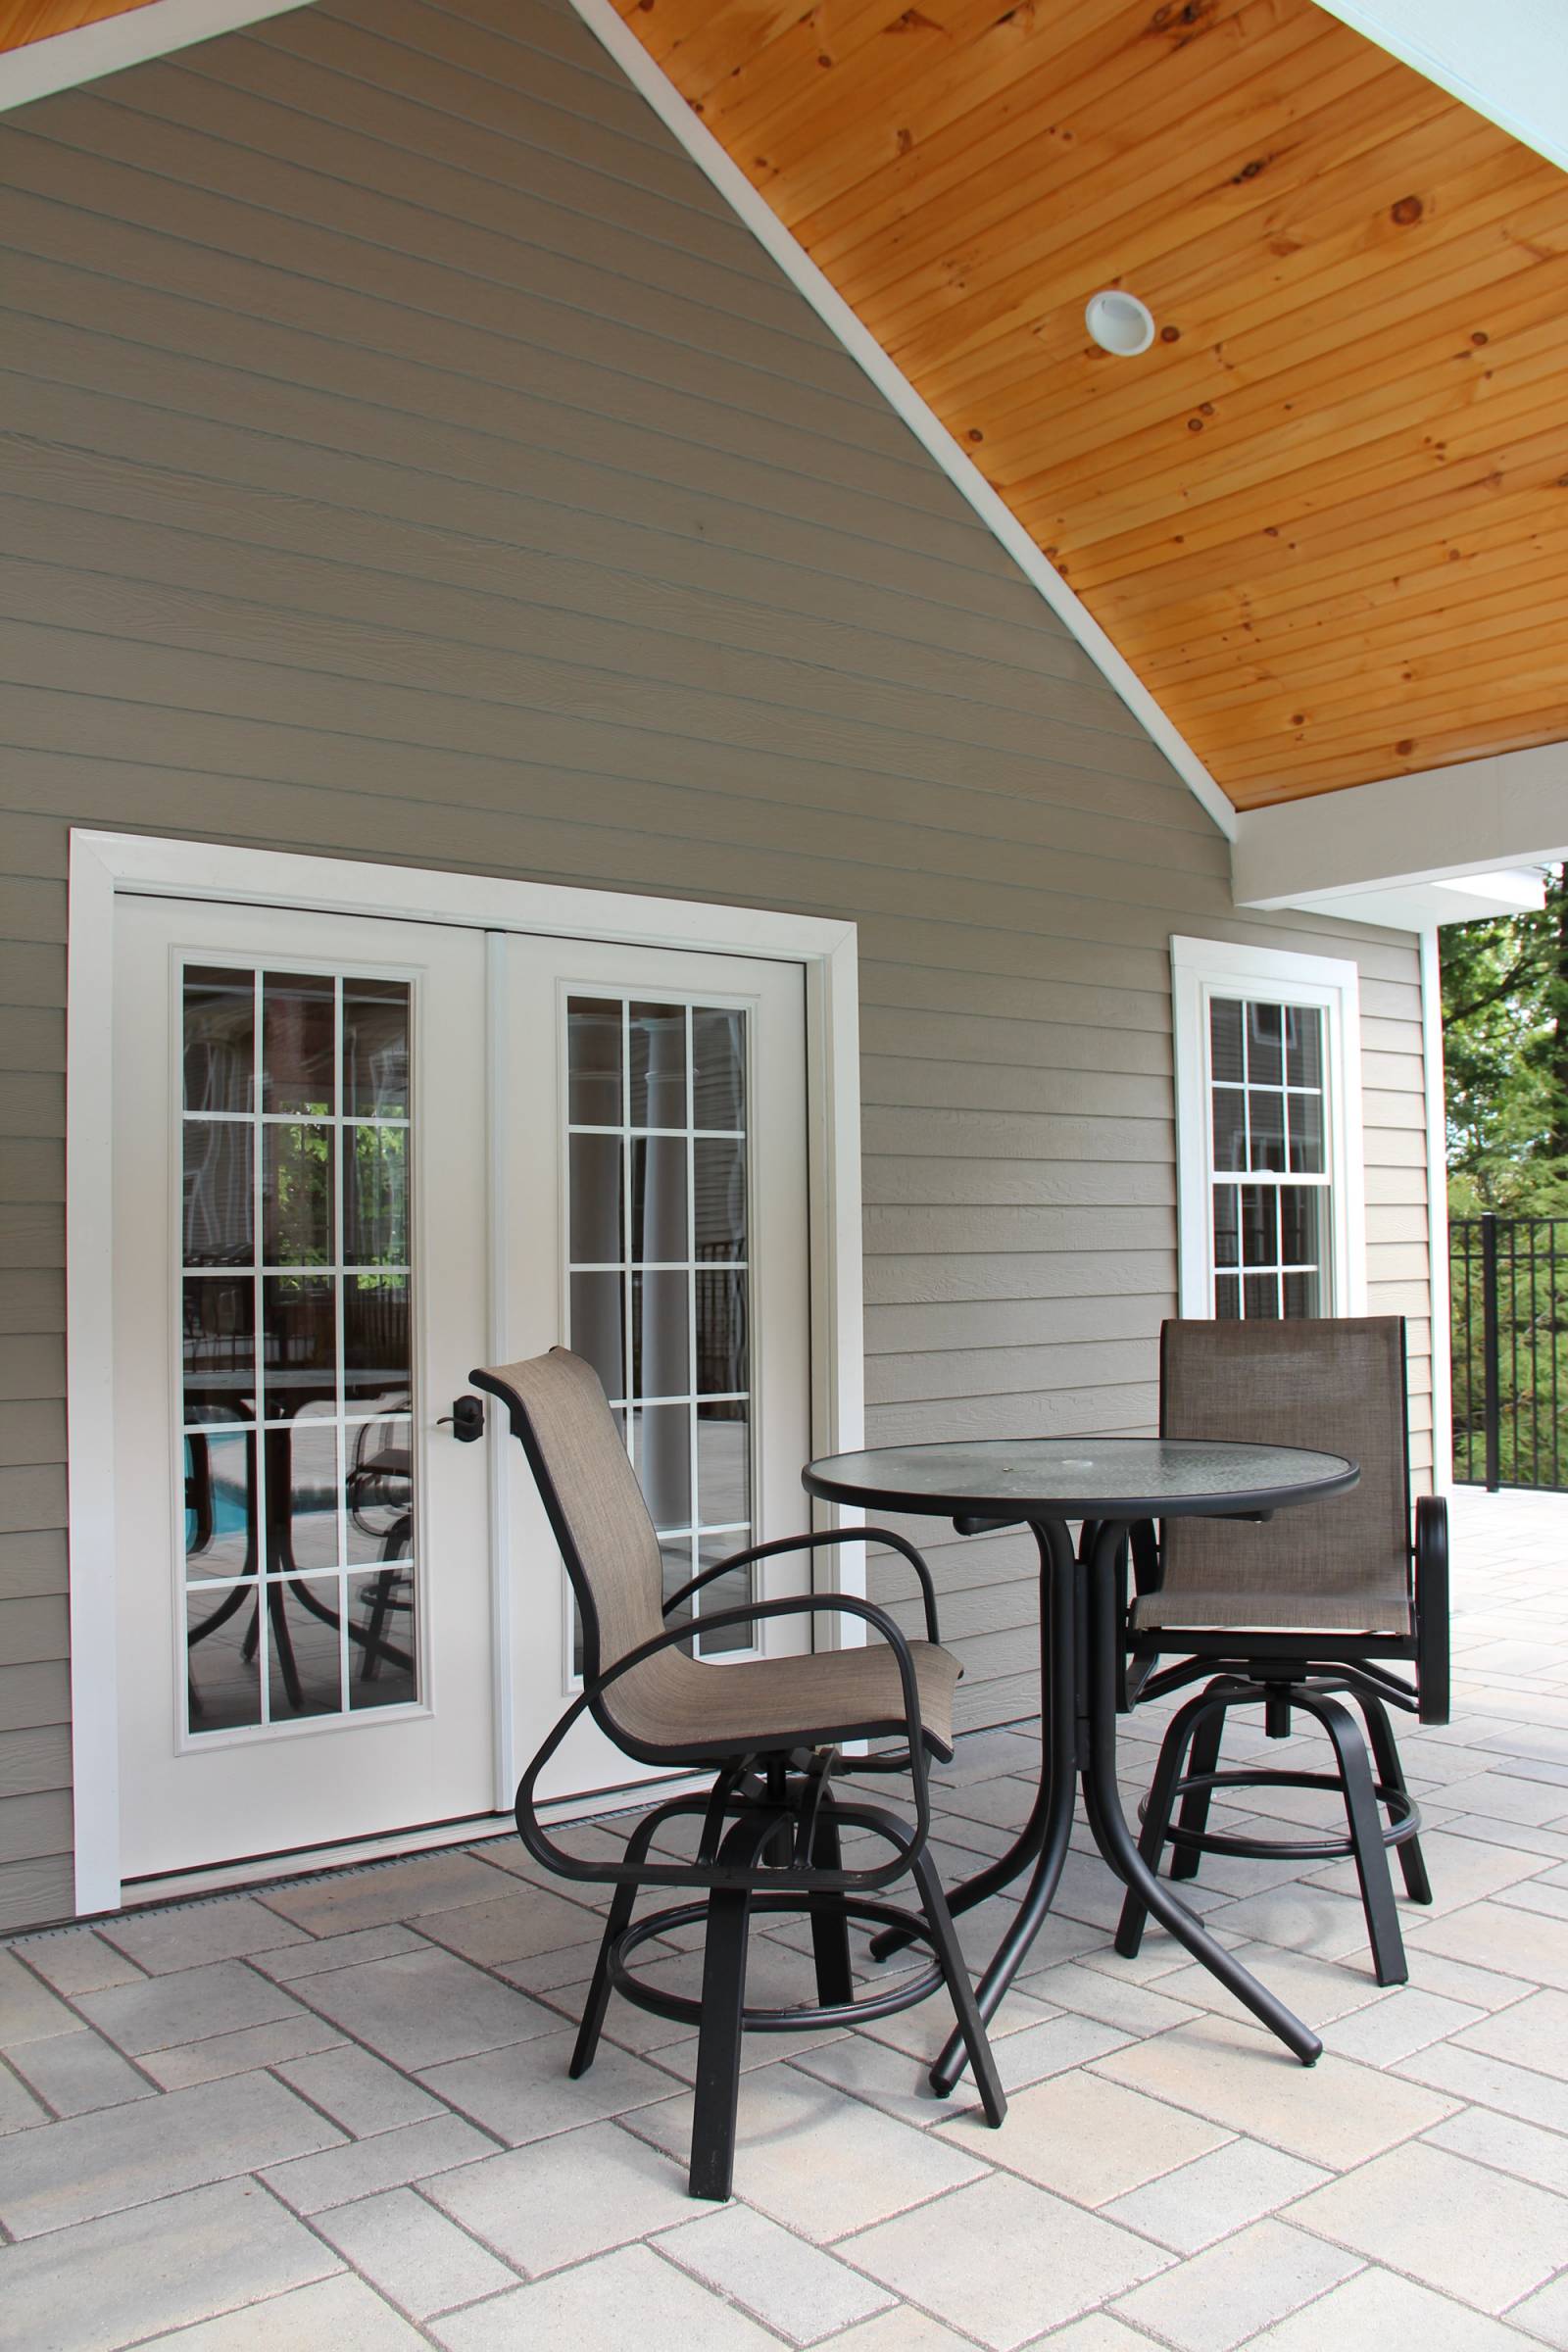 6' French doors with full view glass • LP Smart Siding (painted to match the house)